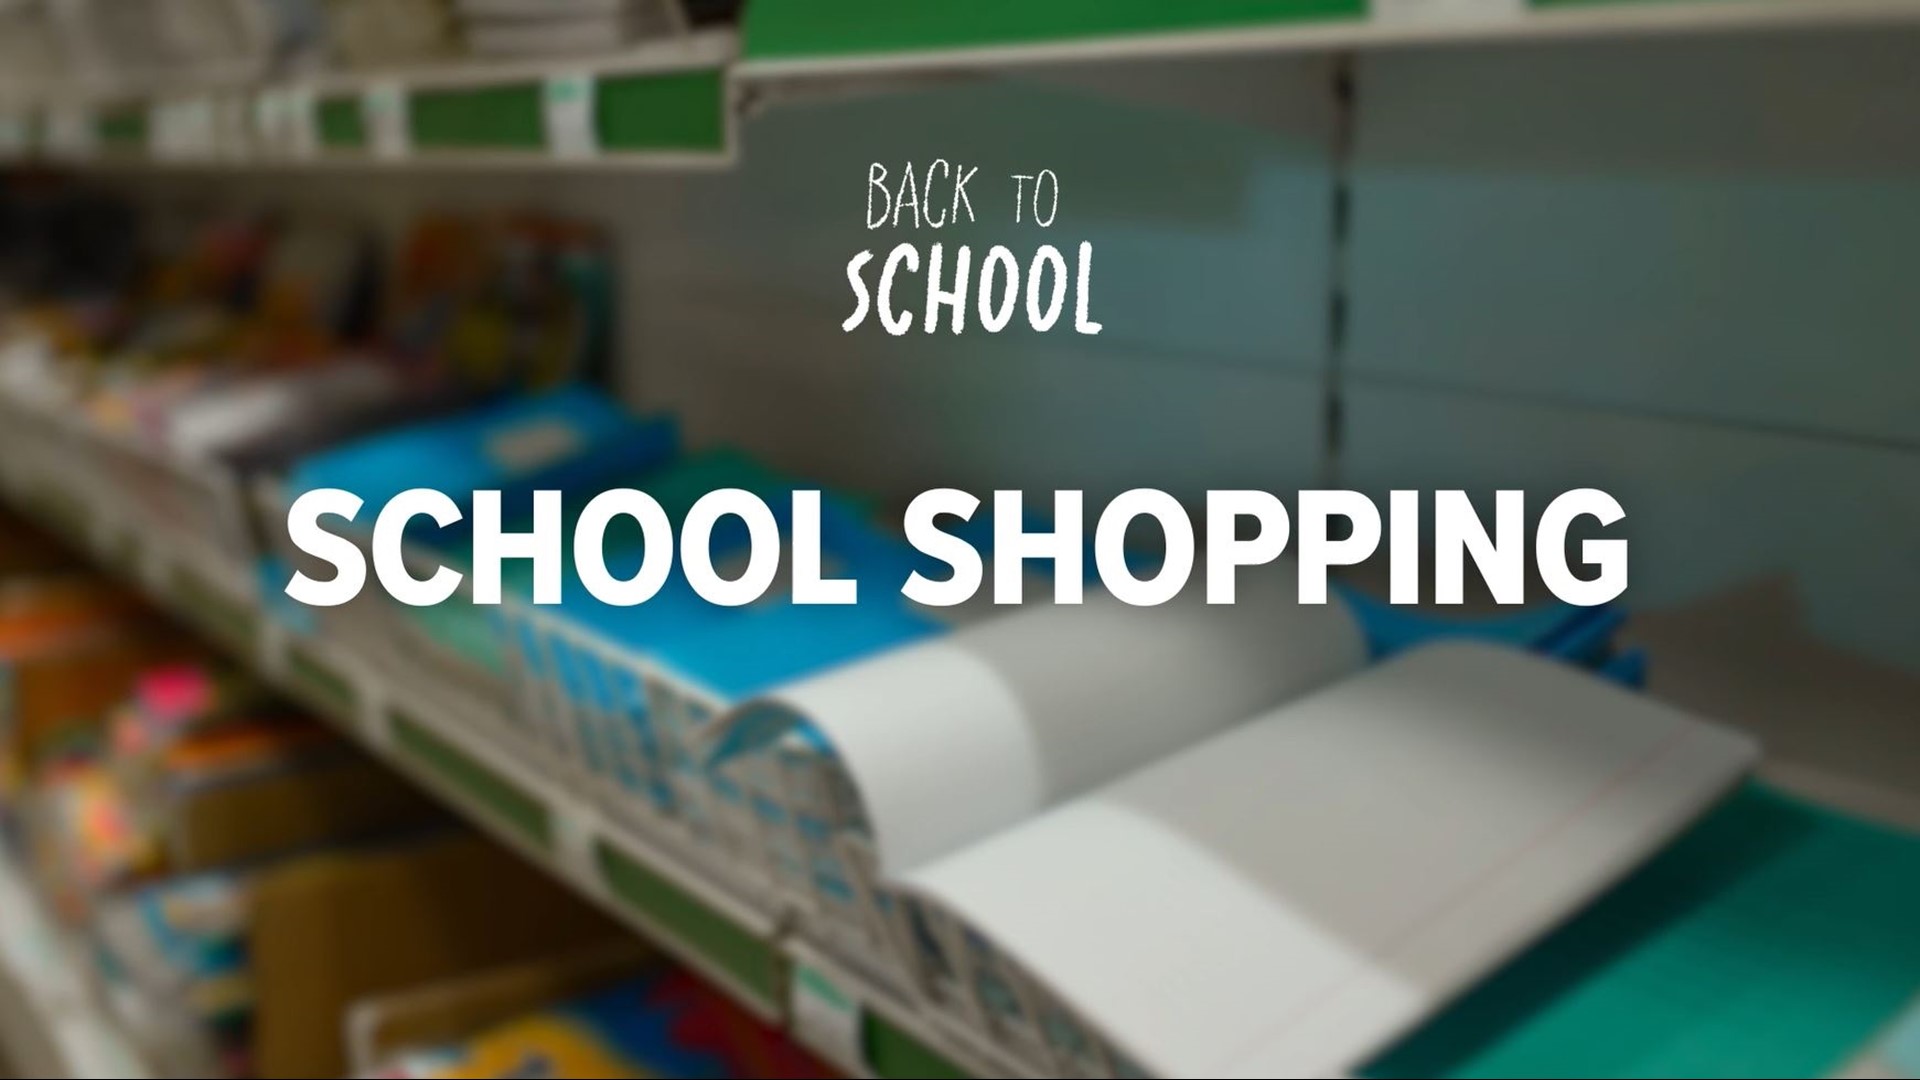 Back To School Sales - Bargains that You NEED to Know